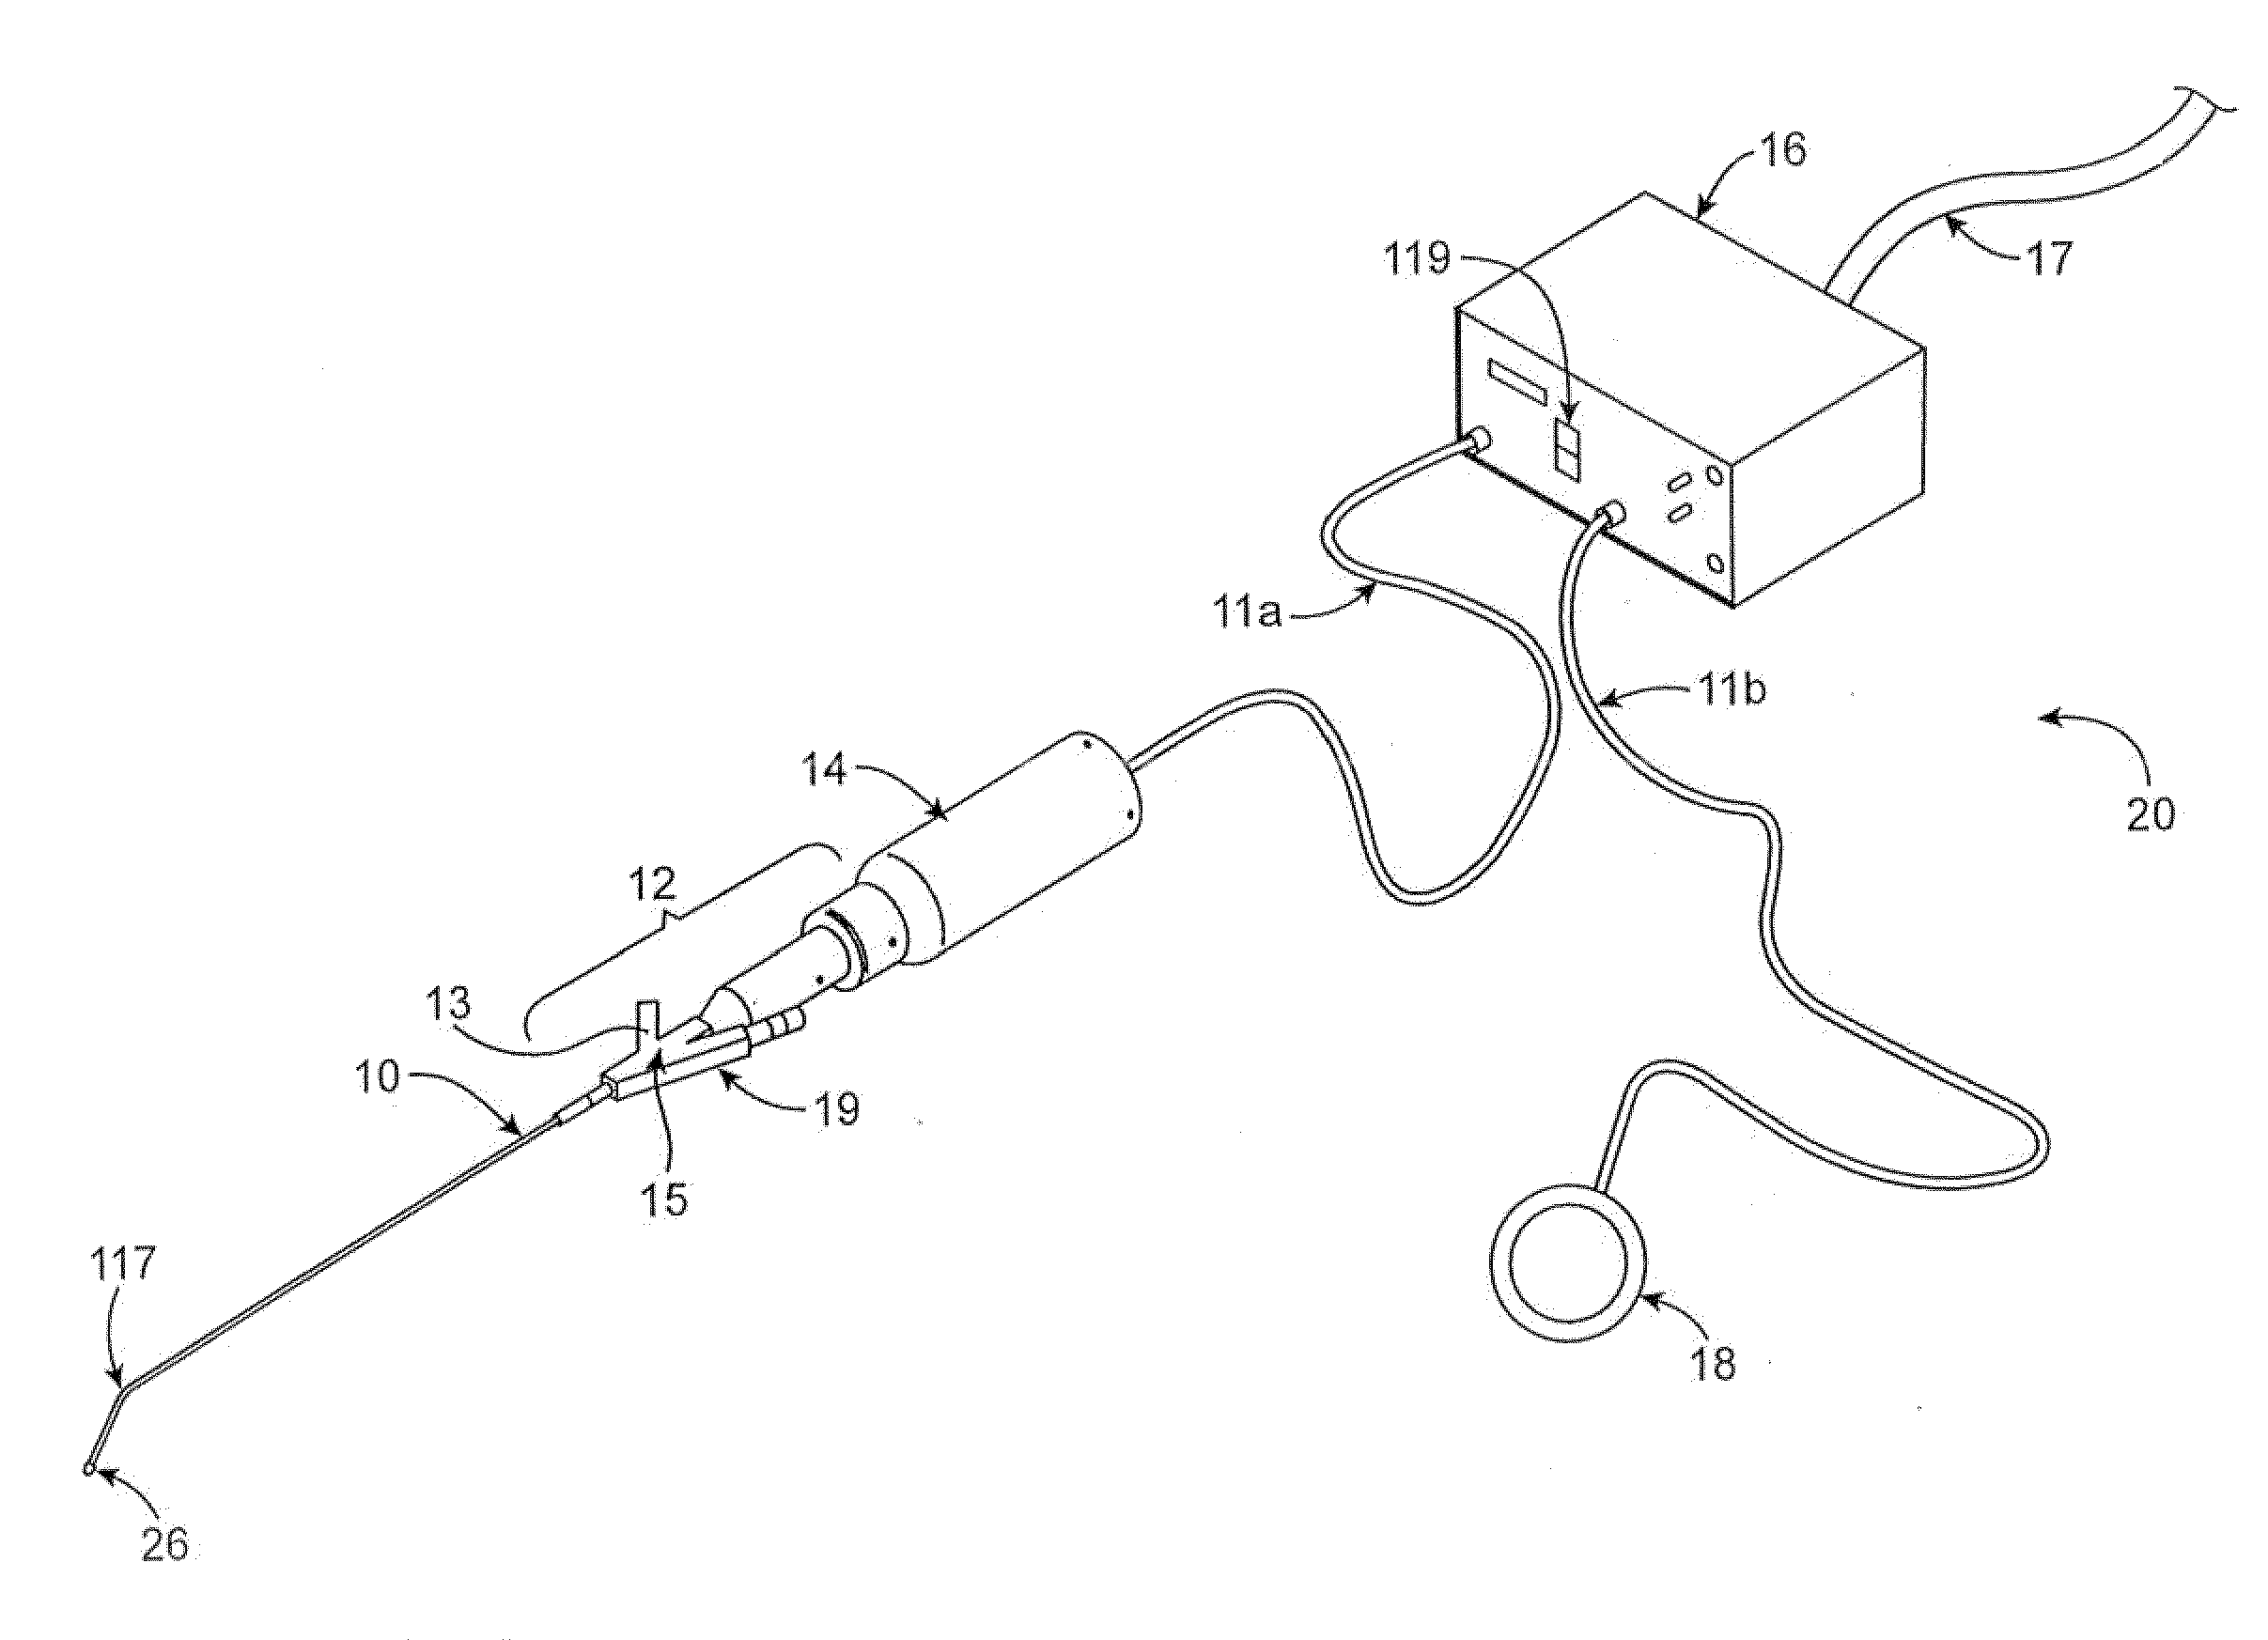 Ultrasound catheter and methods for making and using same